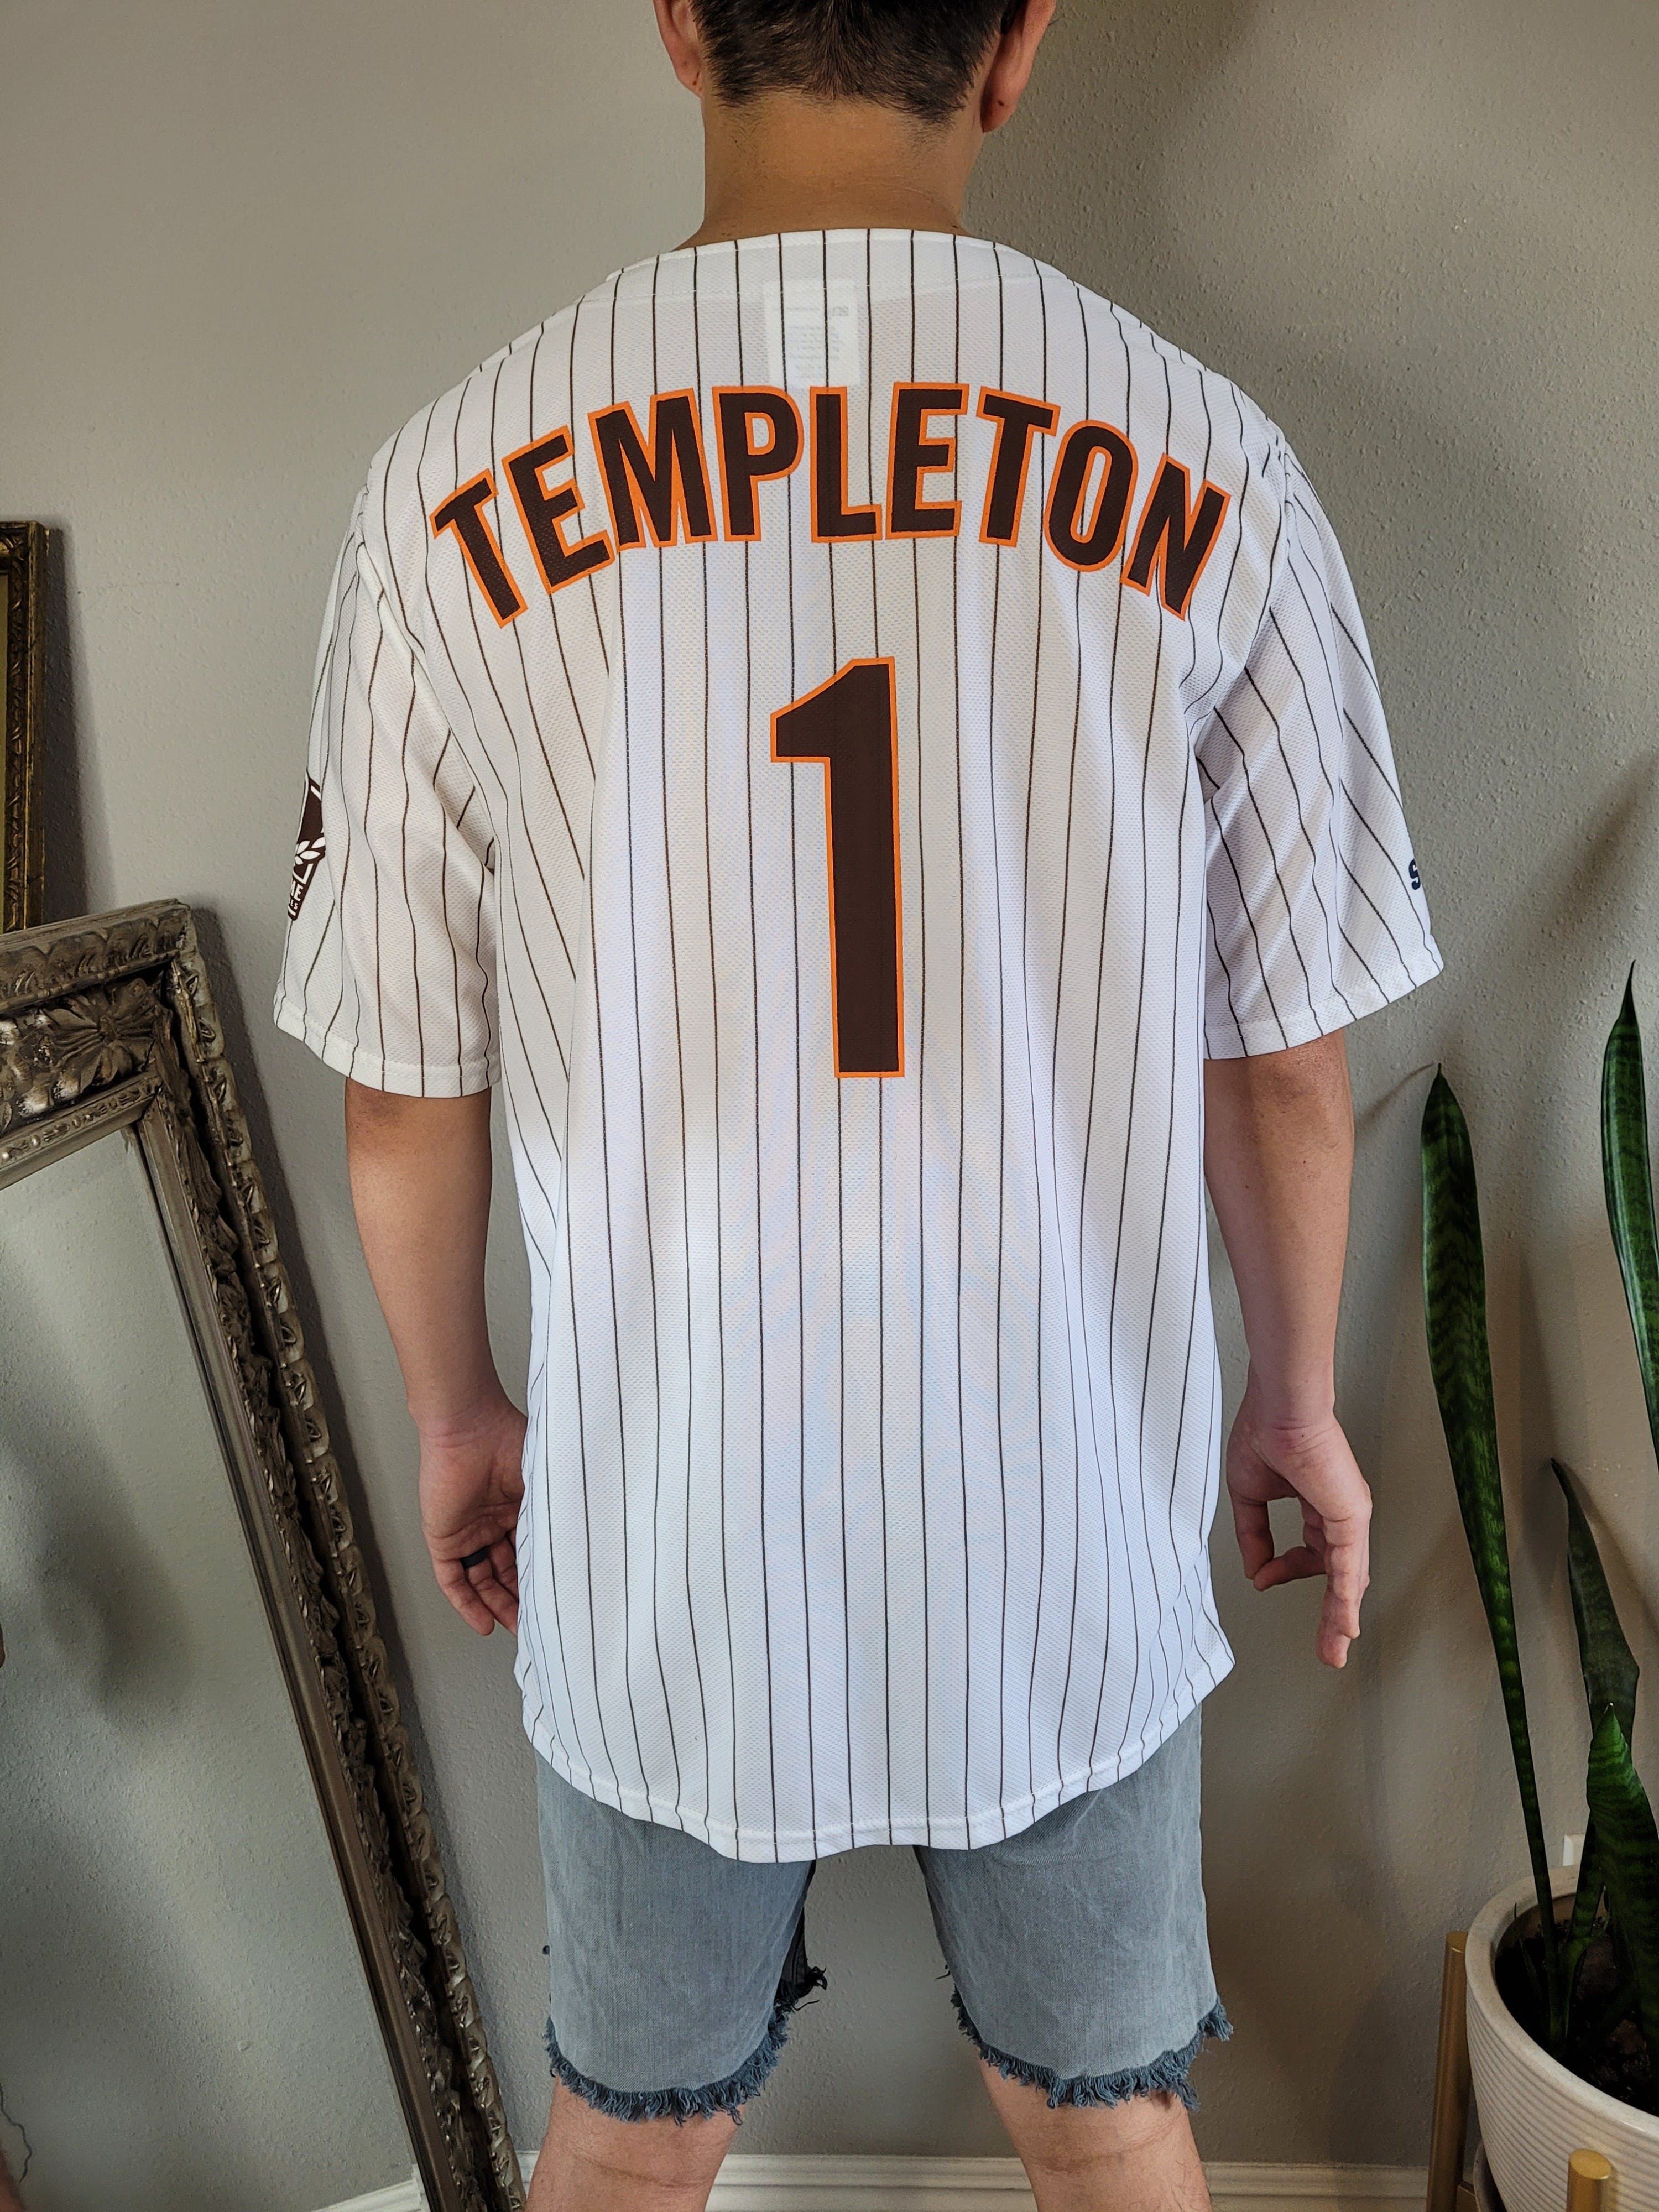 Vintage MLB White Padres Baseball Jersey for Garry Templeton #1 by Padres |  Shop THRILLING